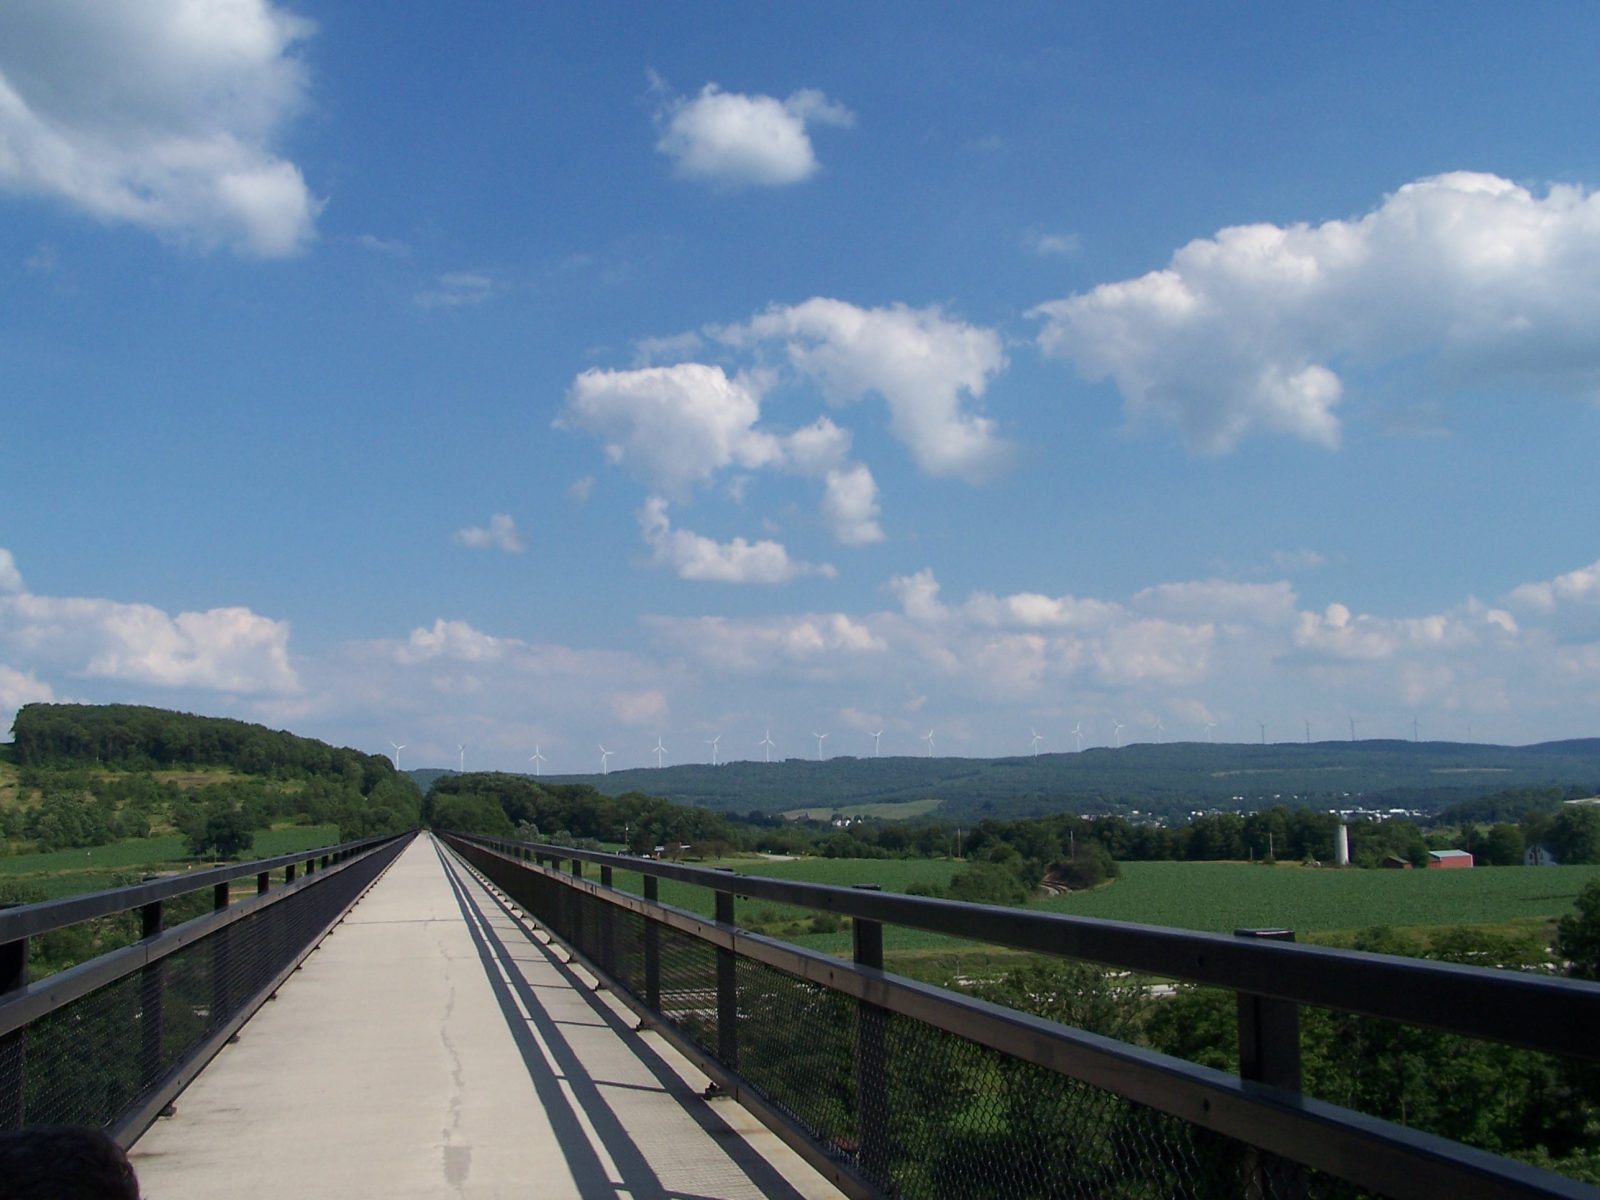 The Great Allegheny Passage stretches from Pittsburgh to Washington, D.C., constructed alongside a former railroad and cutting through small towns along the way. Photograph by Raun Kercher